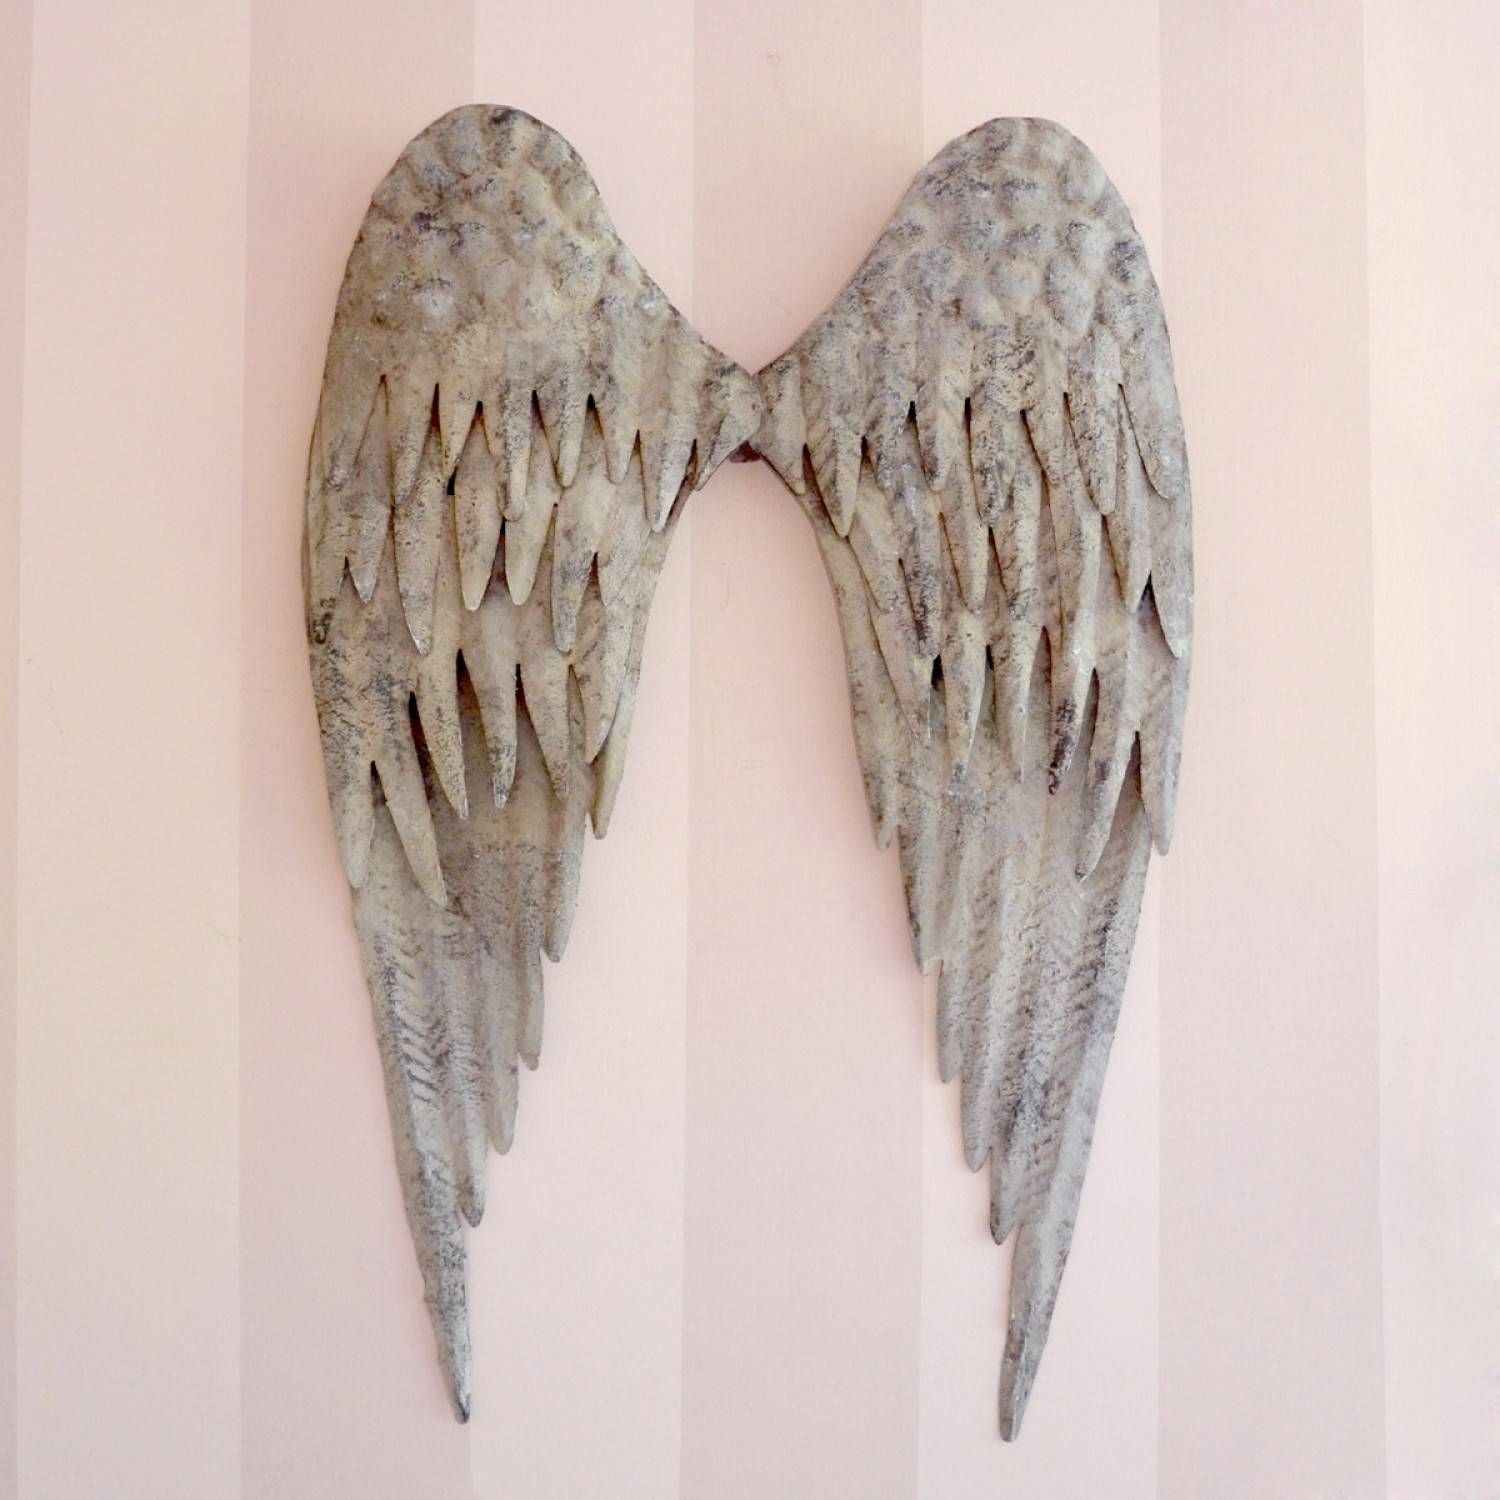 Popular Angel Wings Wall Decor : Garnish With Angel Wings Wall Inside Most Recent Angel Wings Wall Art (Gallery 20 of 20)